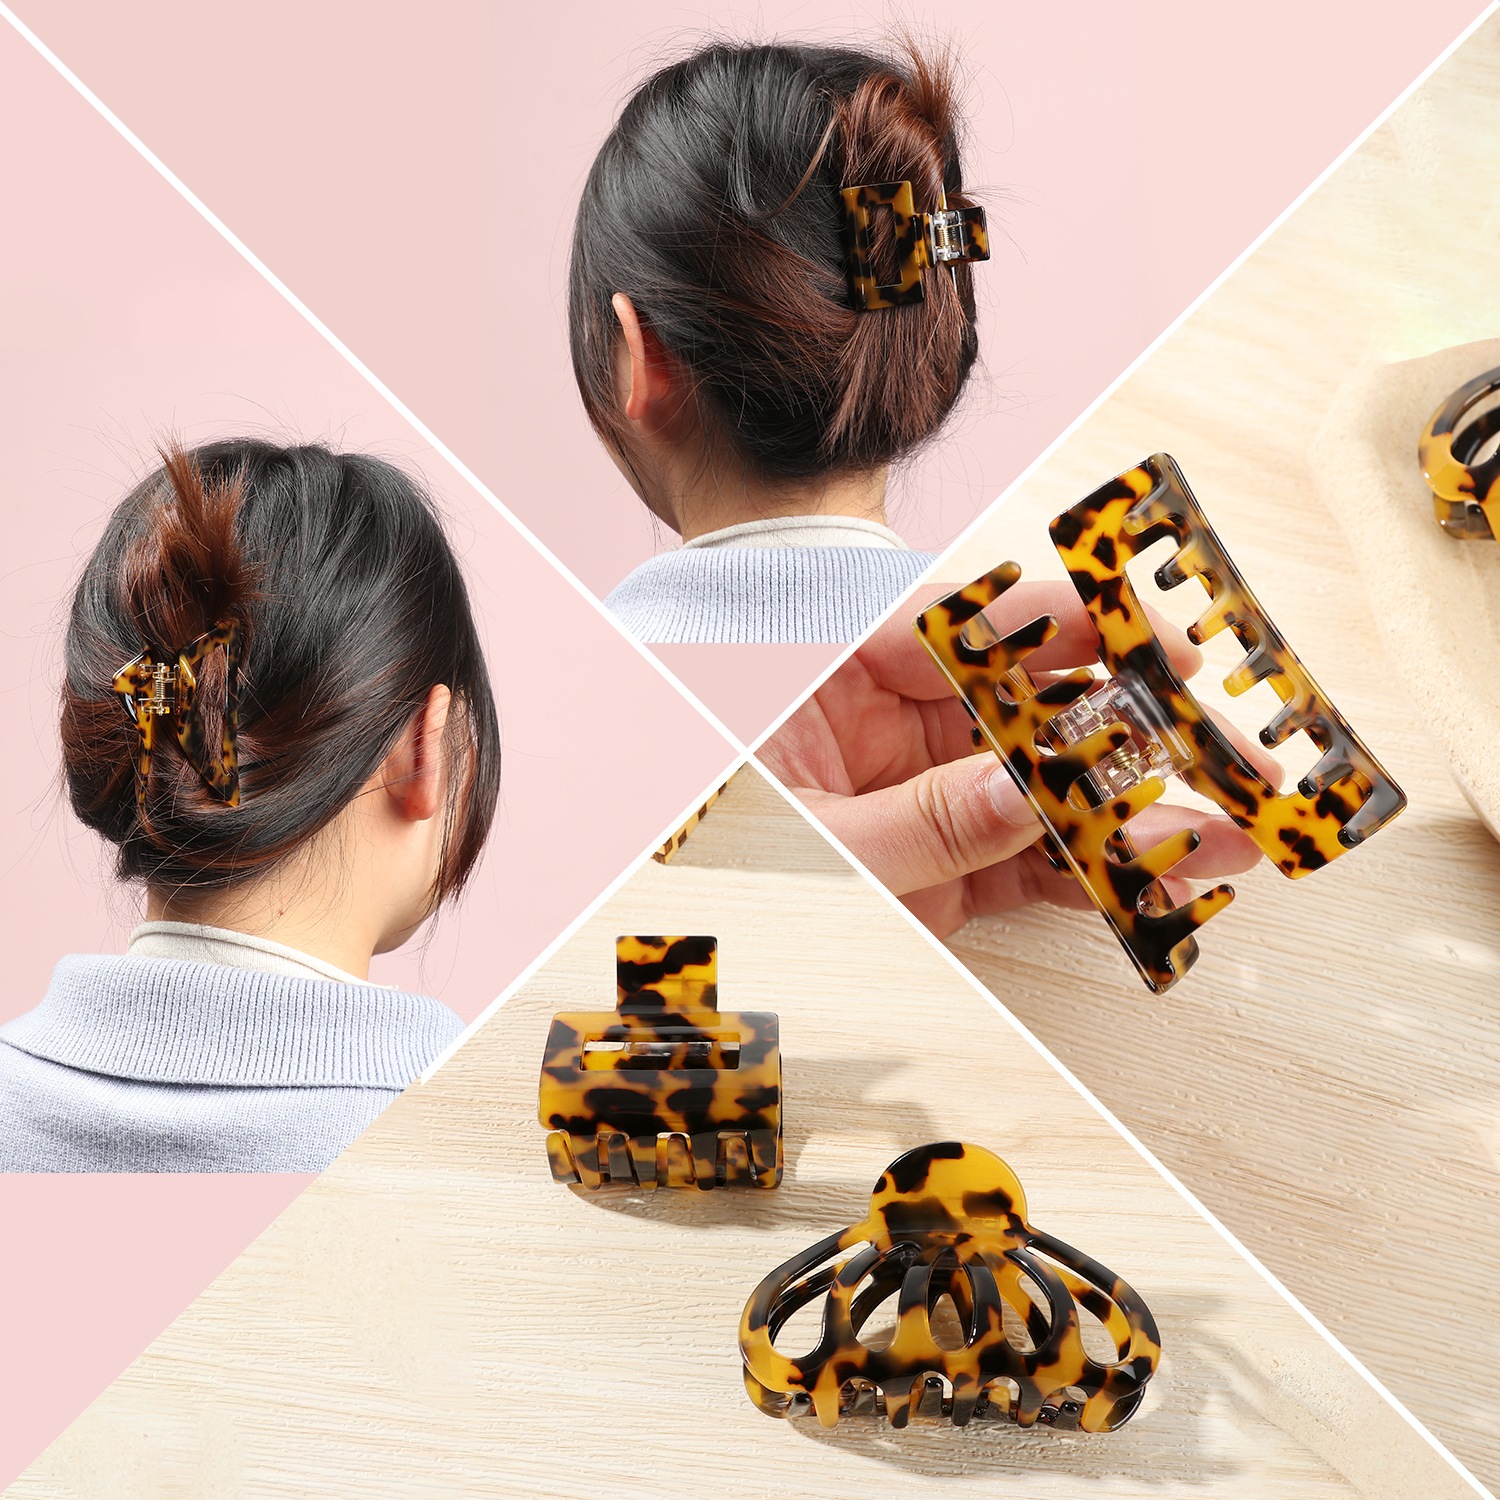 XIANSTORE Women Tortoise Claw Ponytail Holder Hair Clip Acrylic Rectangle Leopard Print Non-Slip Strong Hold Barrette Long Hair